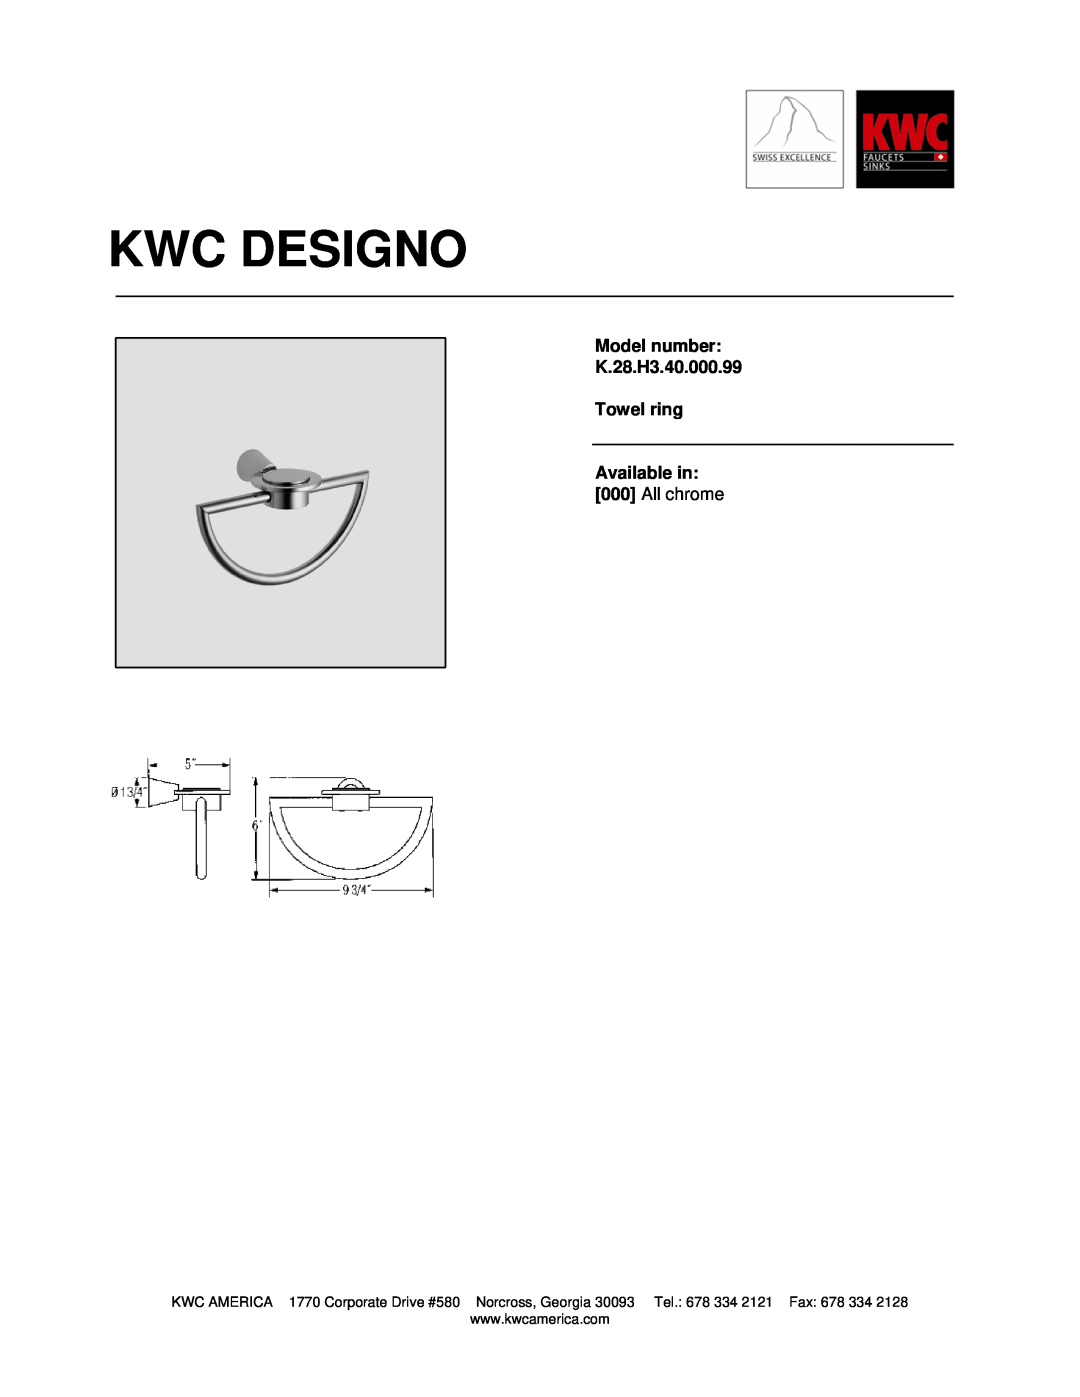 KWC manual Kwc Designo, Model number K.28.H3.40.000.99 Towel ring, Available in 000 All chrome 